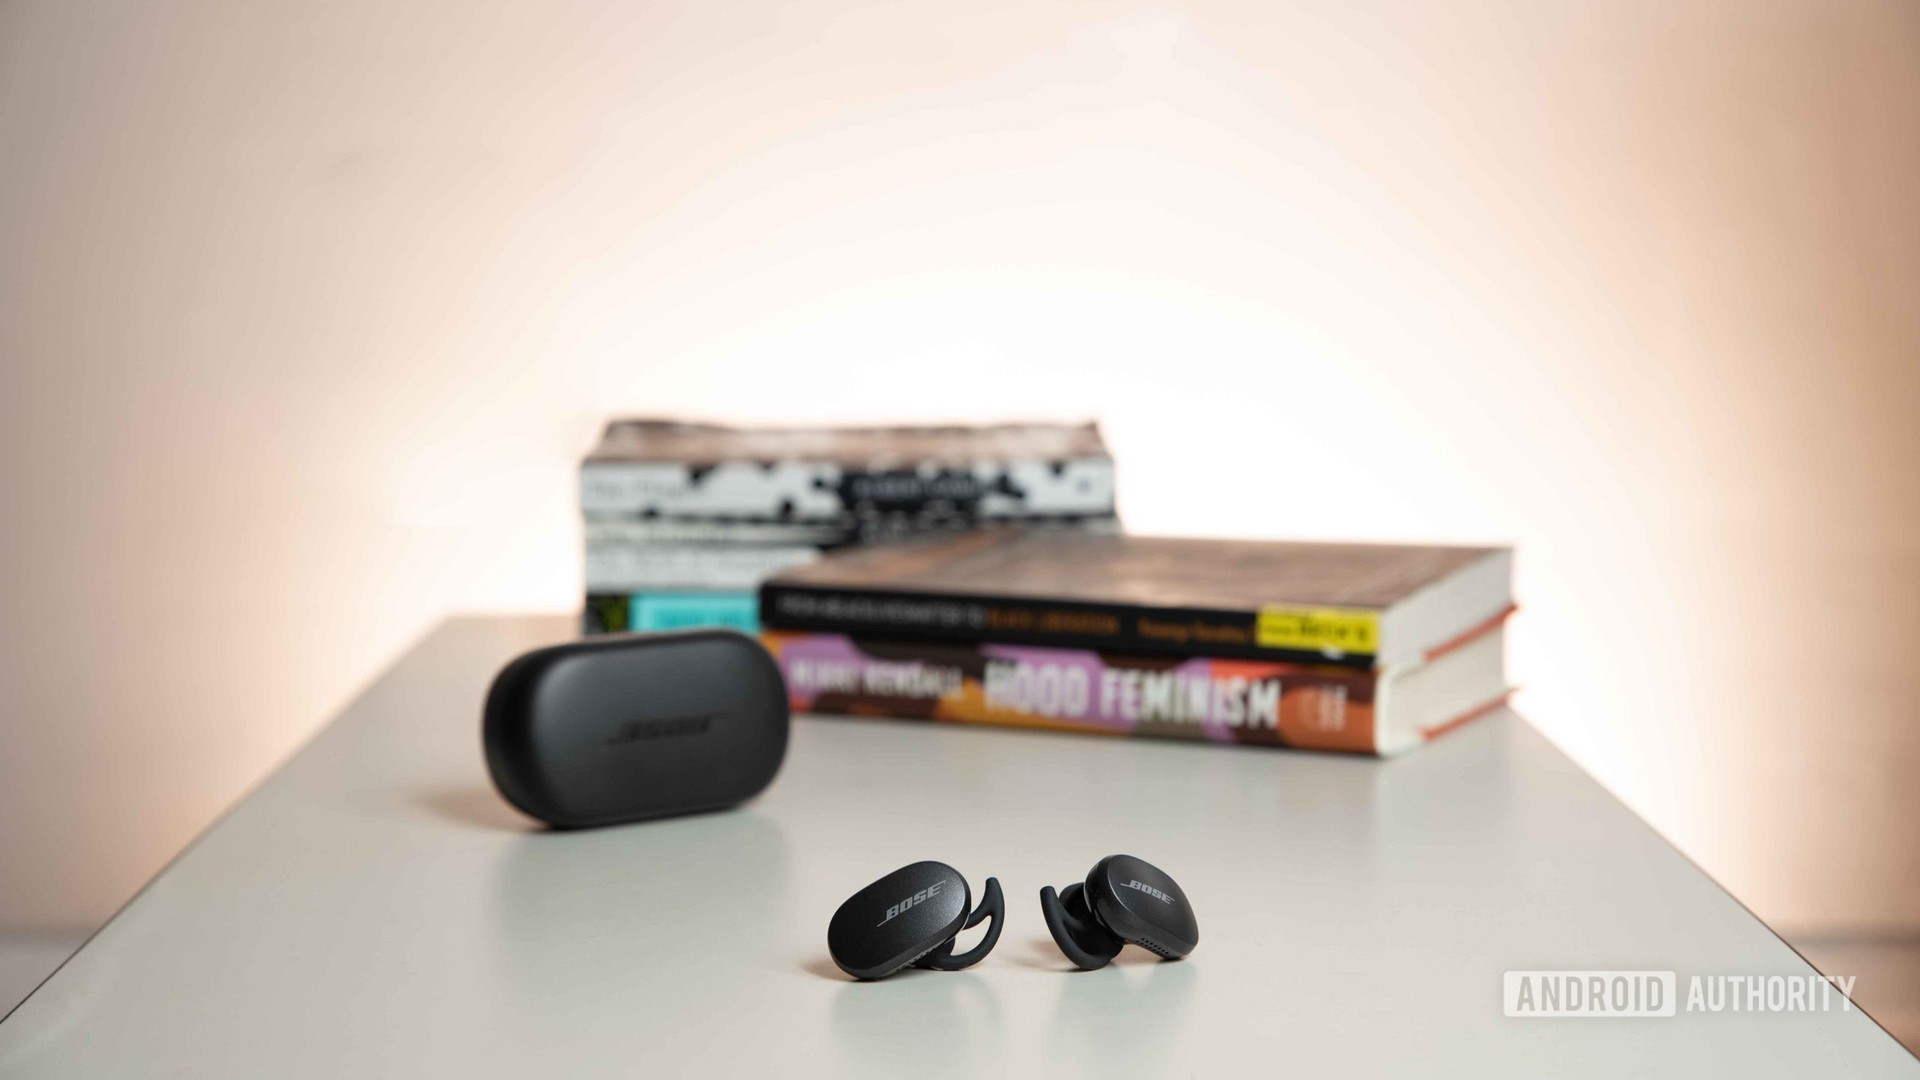 The Bose QuietComfort Earbuds noise cancelling true wireless earbuds rest outside of the charging case on a table and in front of a stack of books.